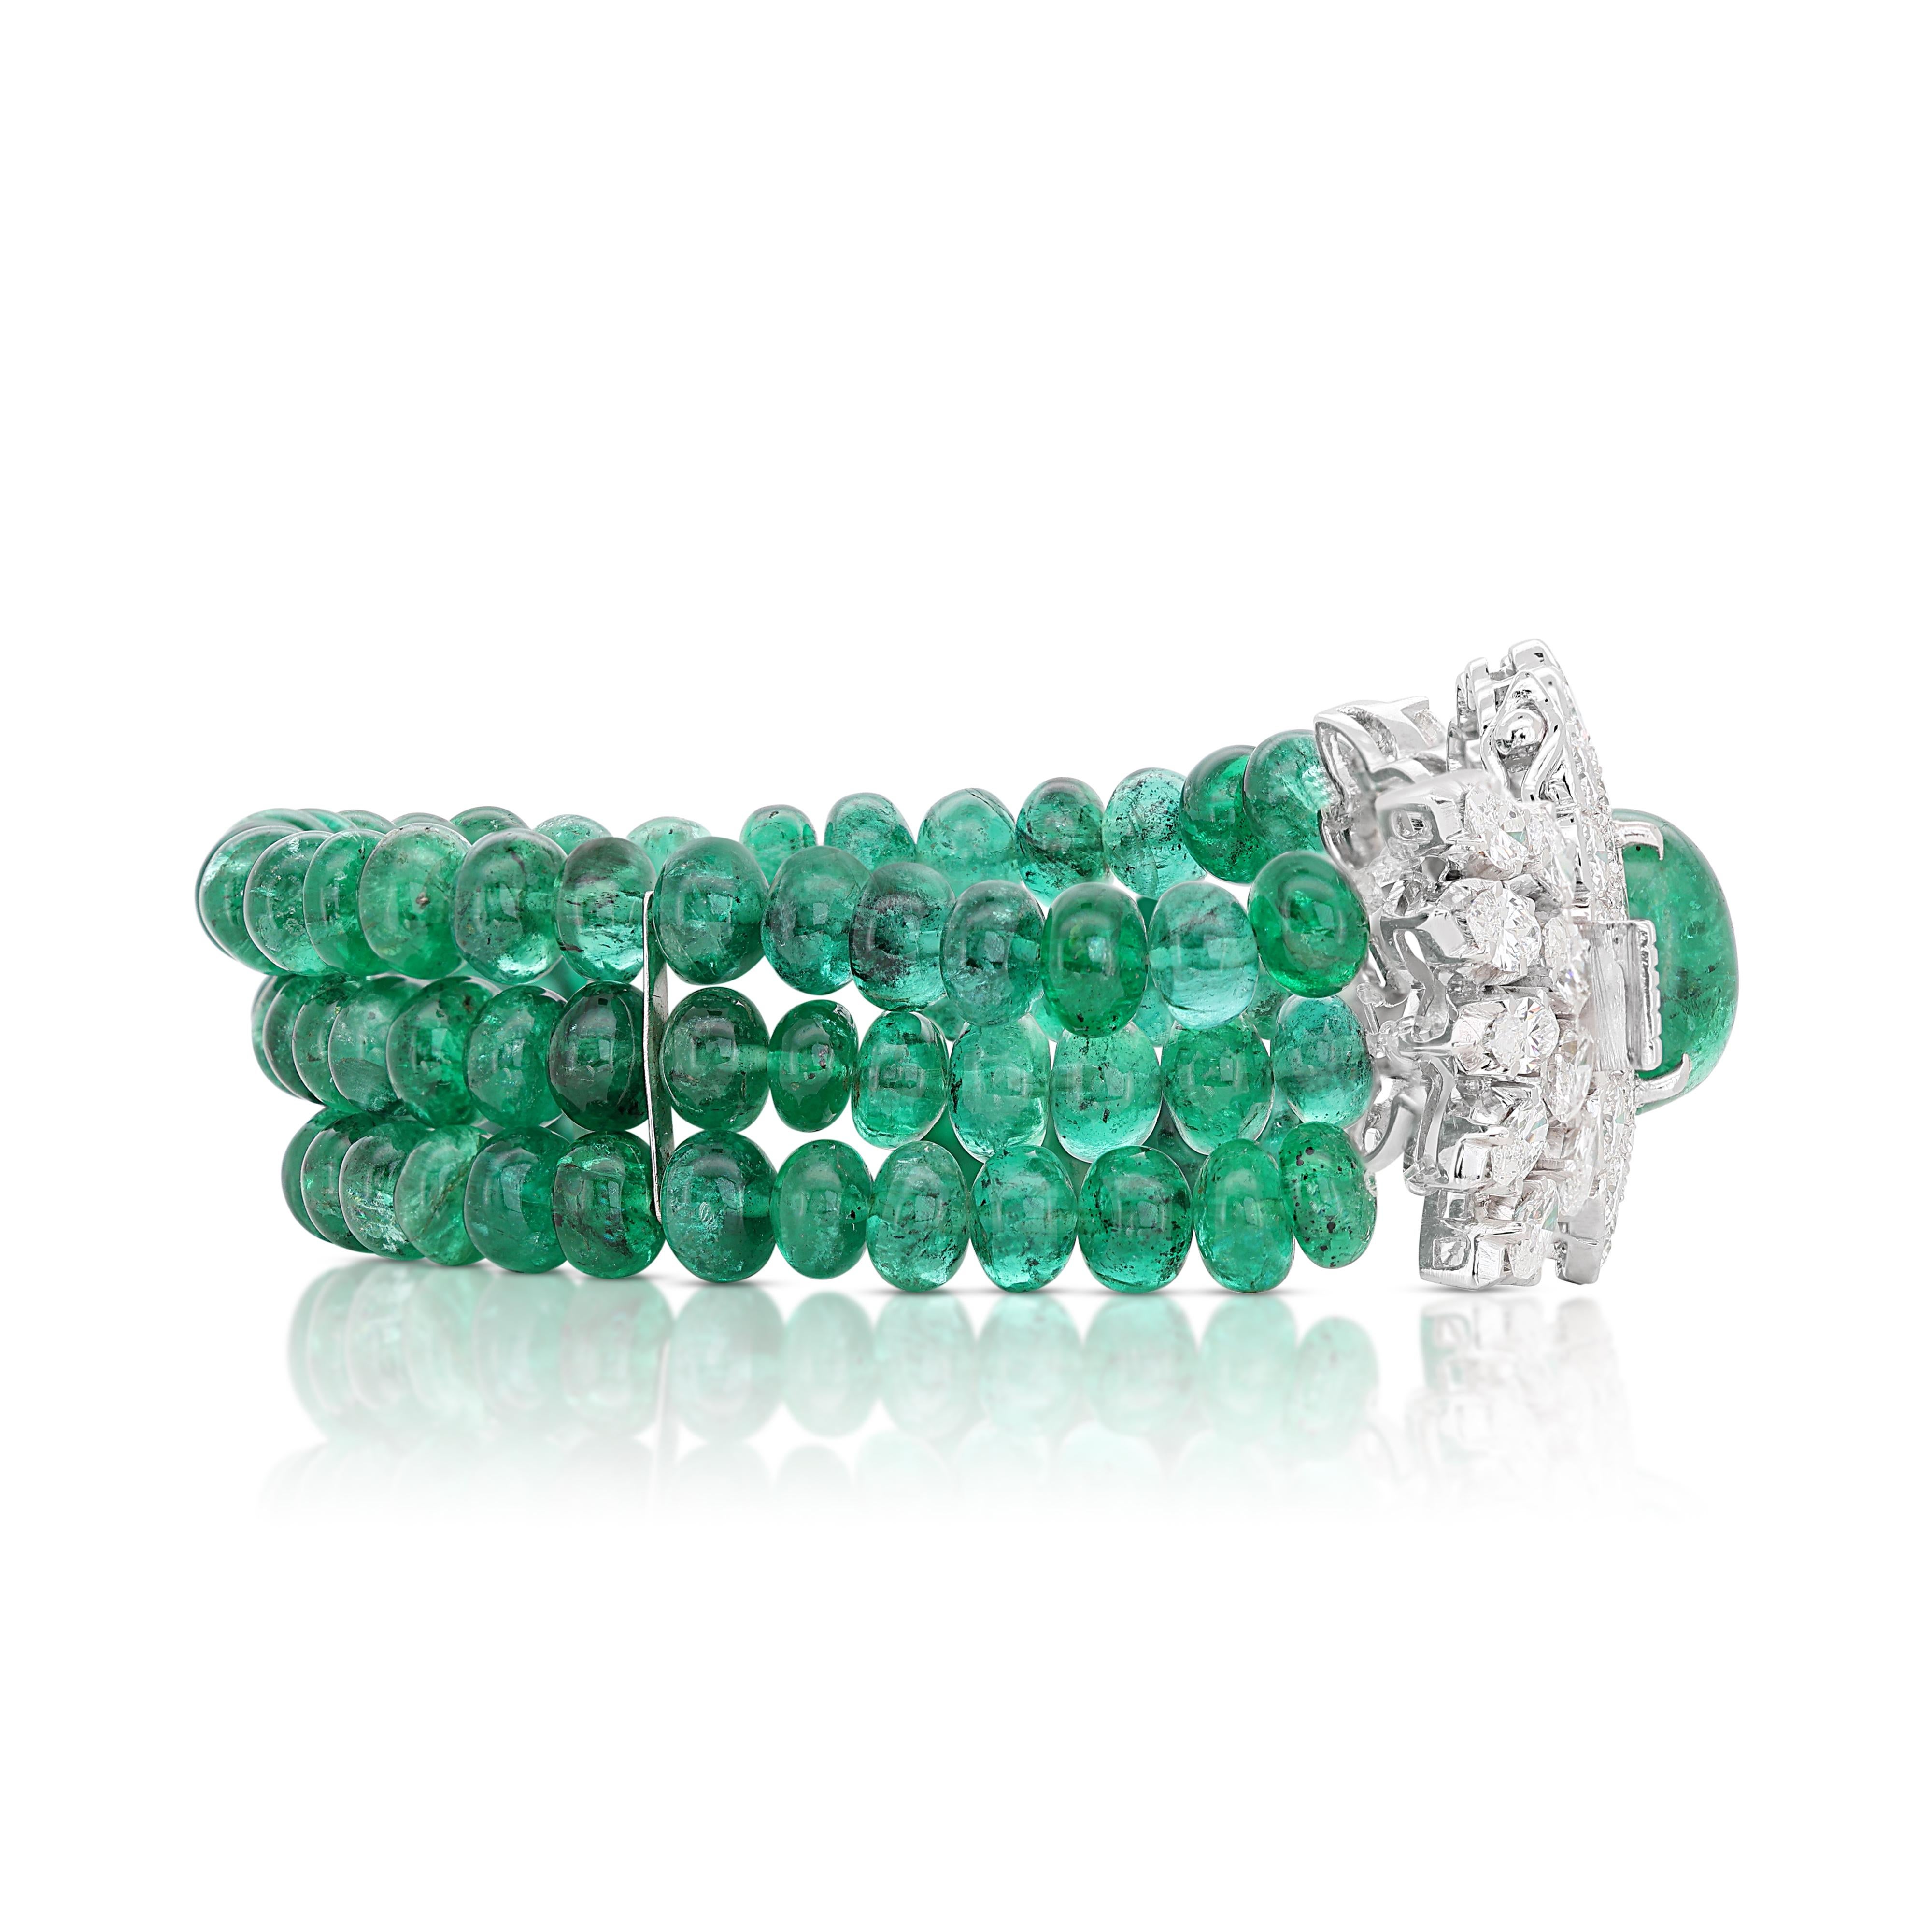 Cabochon Stunning 4.76ct Emerald Bracelet with Diamonds in 18K White Gold  For Sale